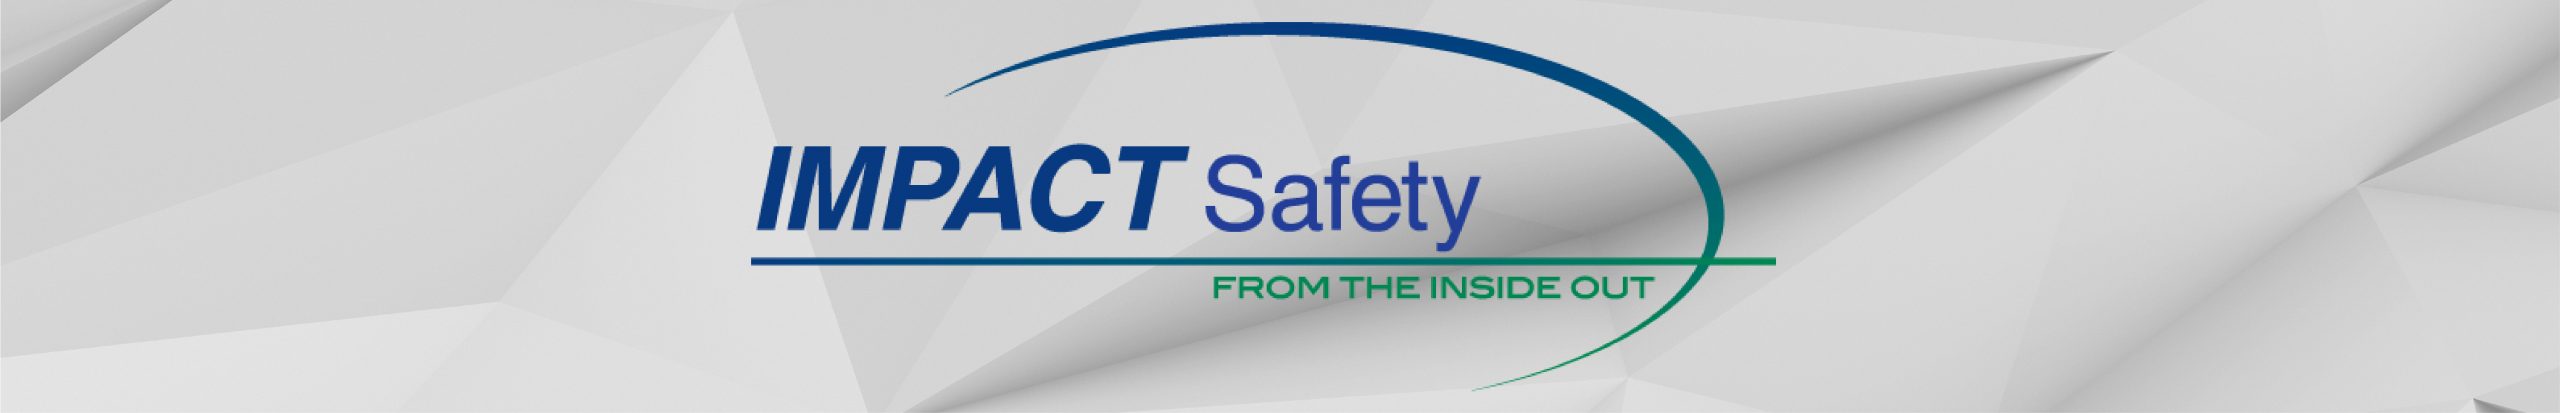 IMPACT Safety logo with blue and green text, featuring the motto 'safety from the inside out' against a marbled silver background.